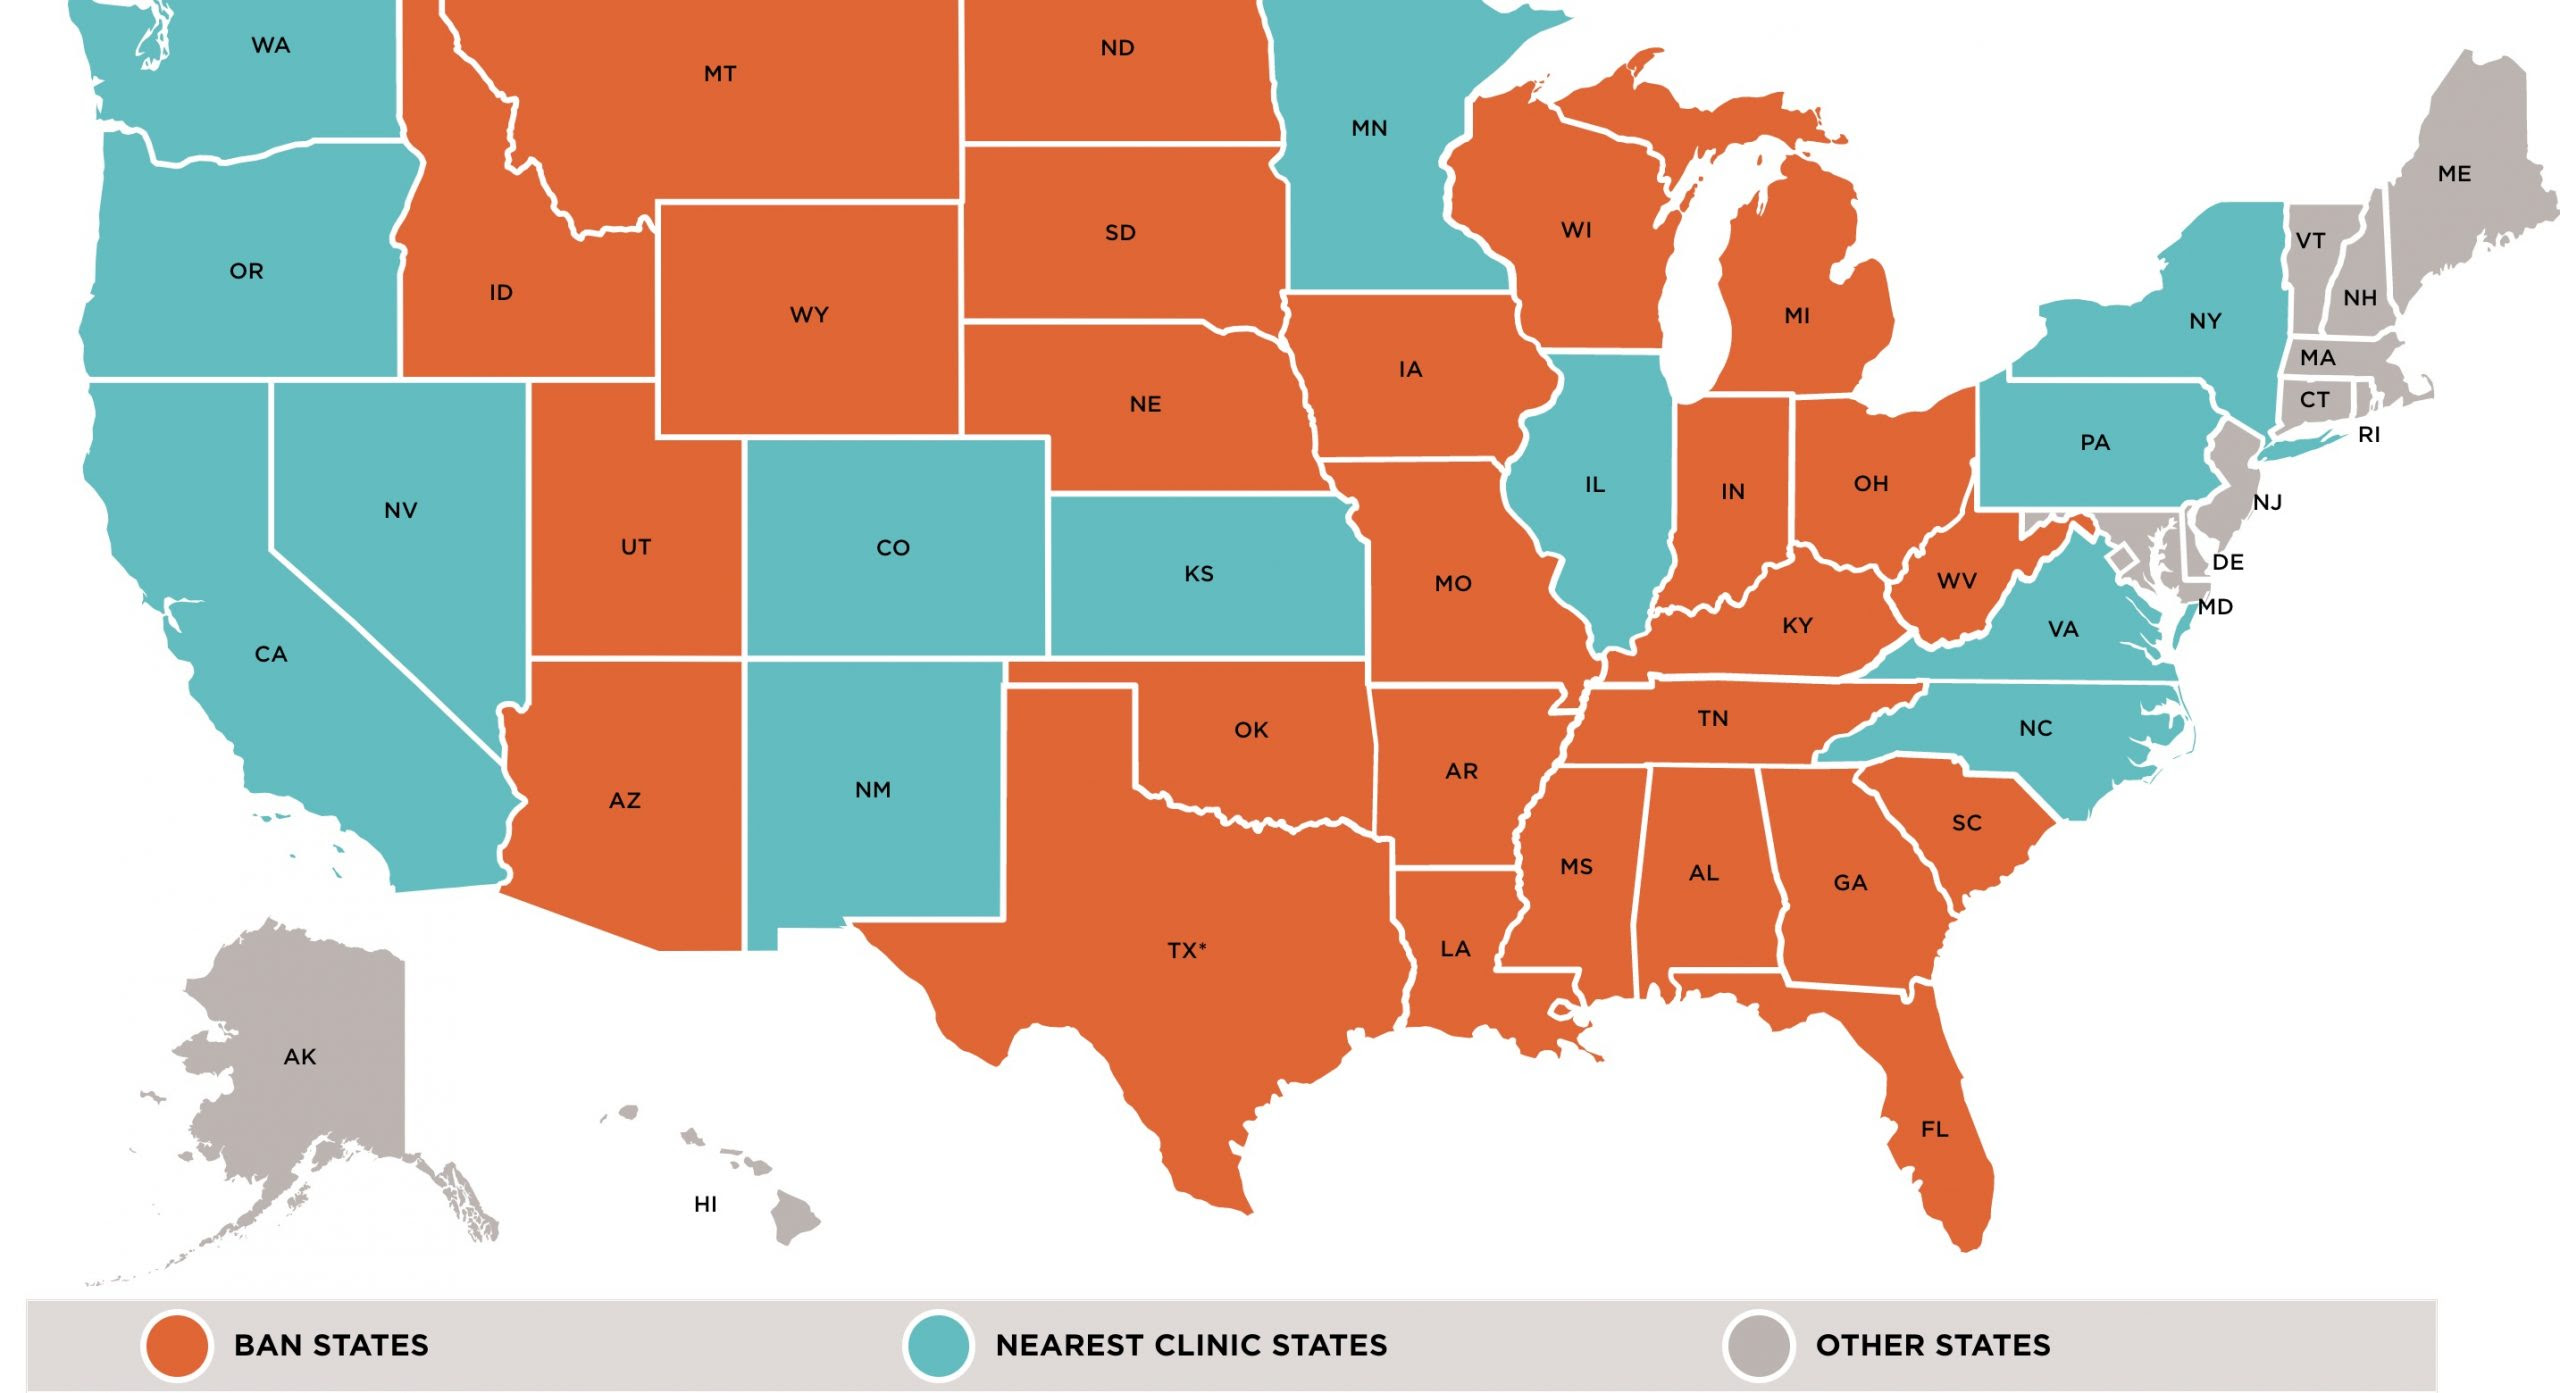 Map of States that would ban abortion and the nearest state - map by Guttmacher Institute